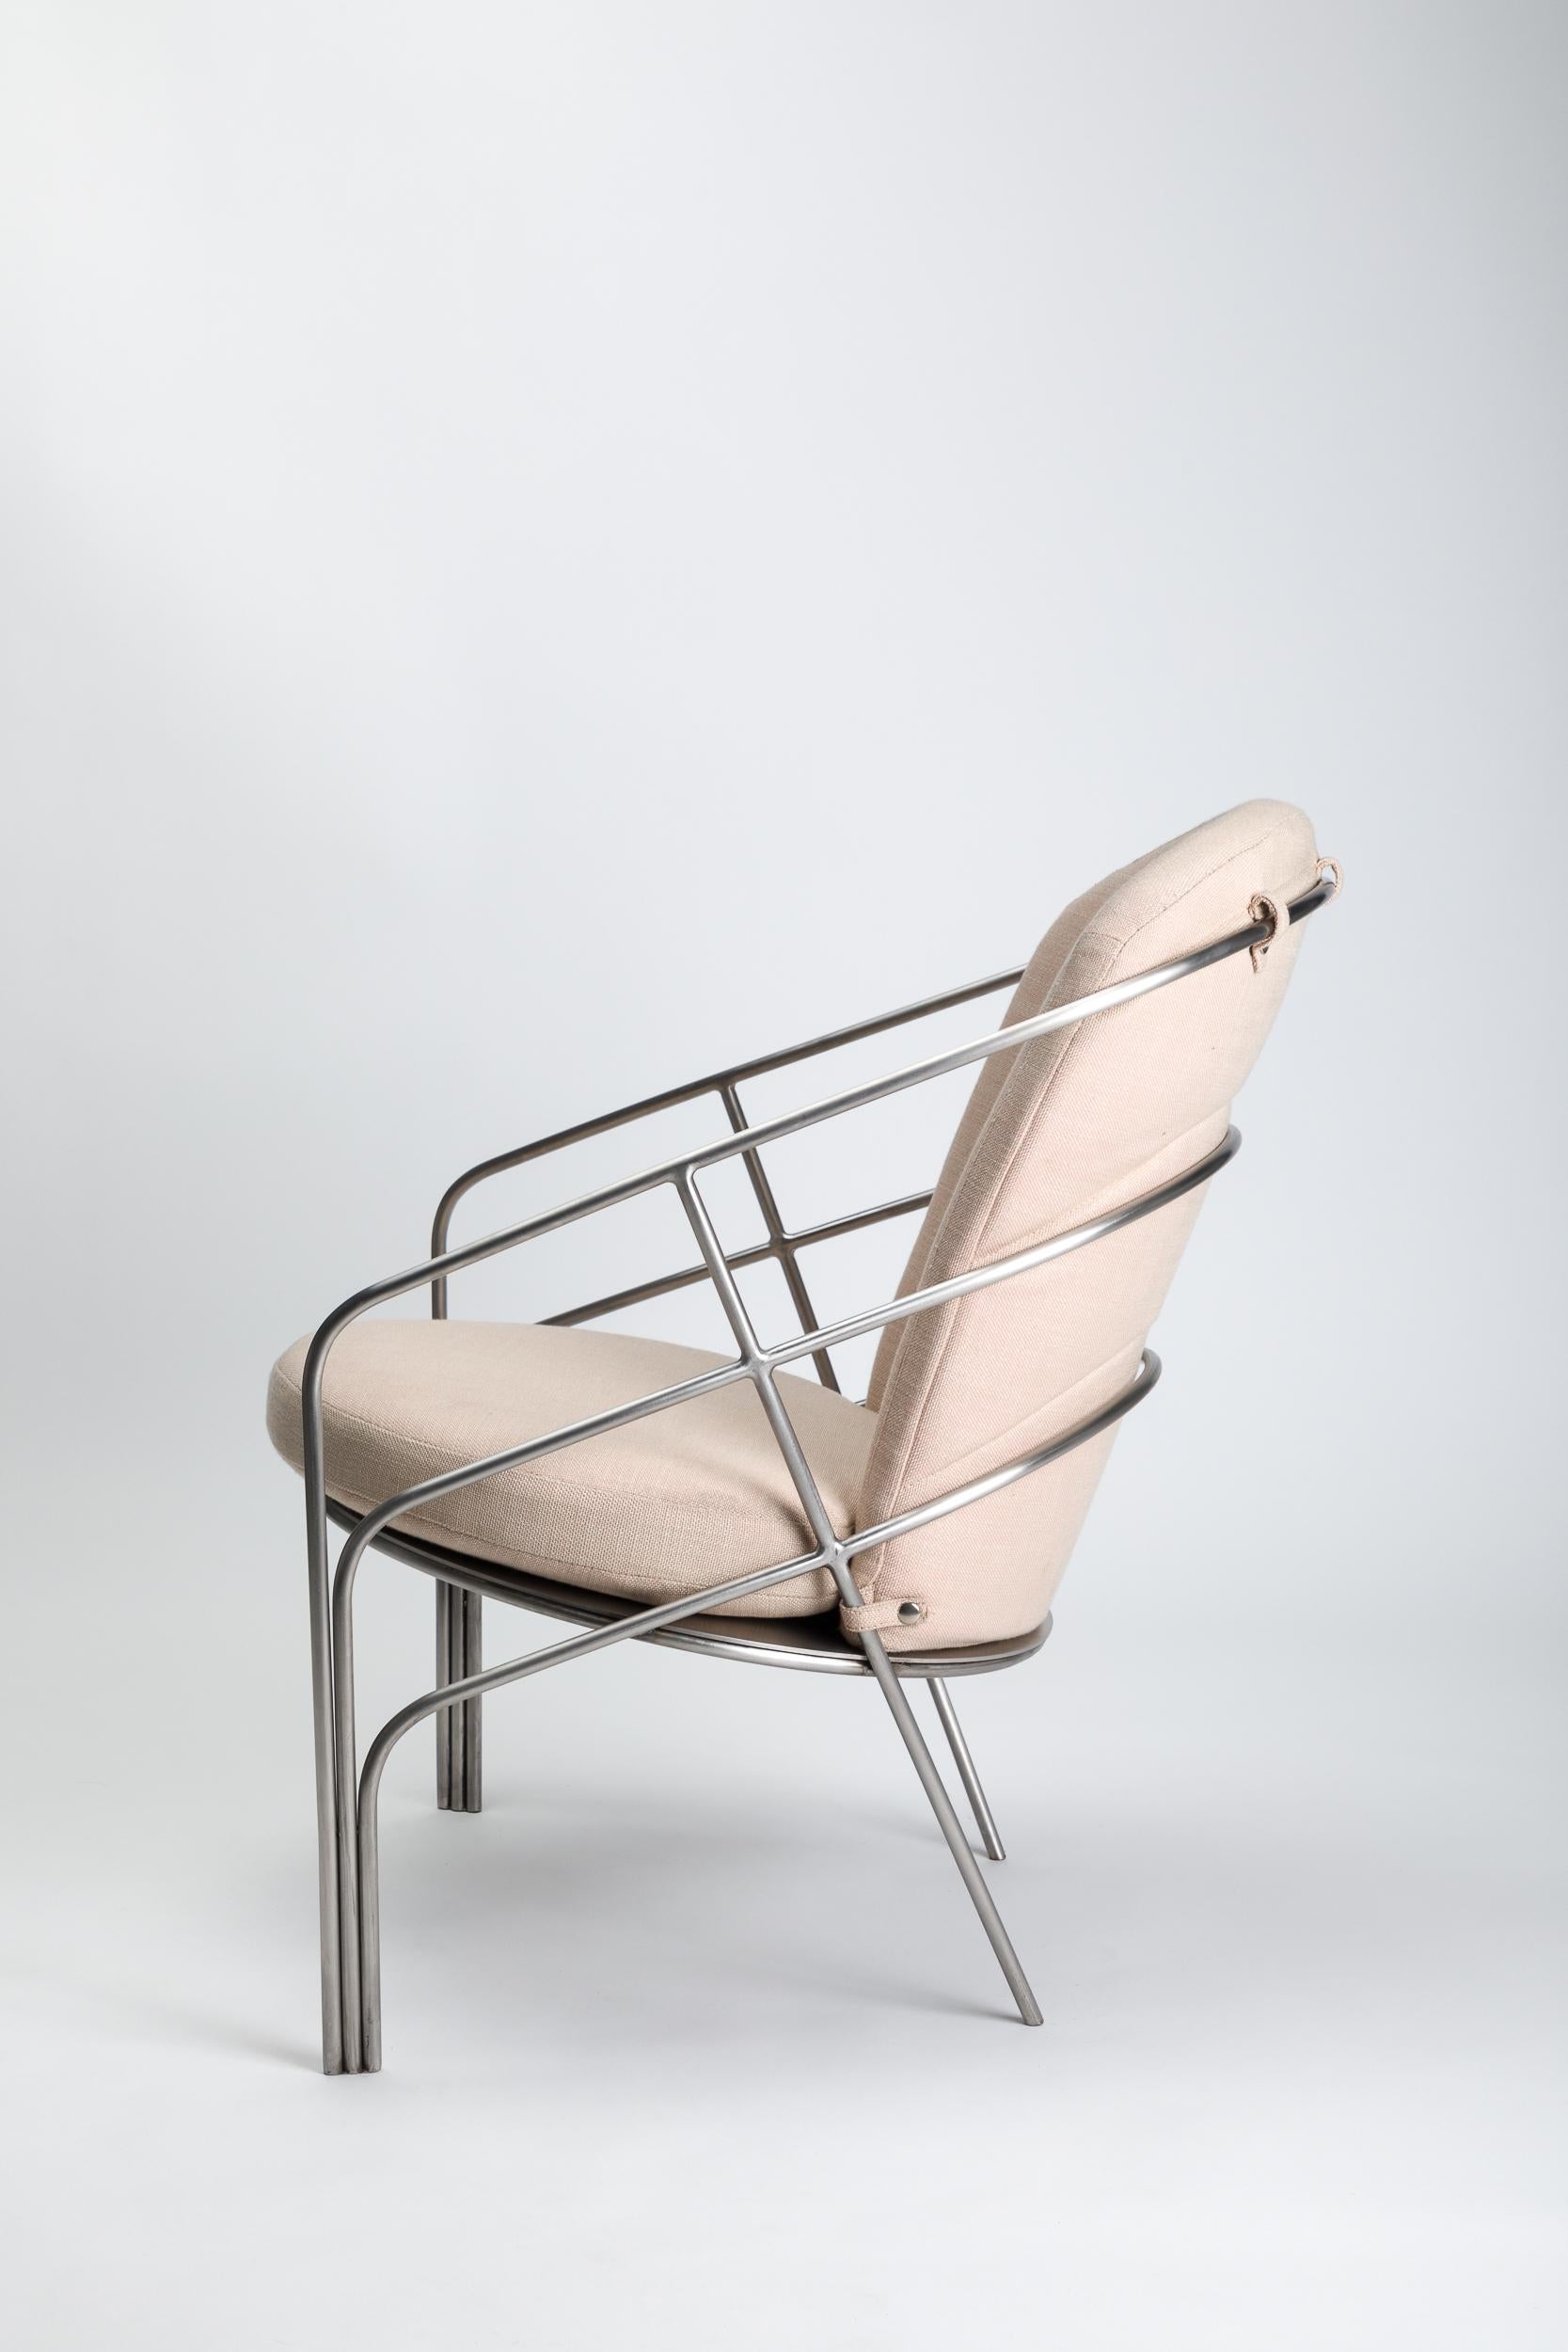 Patinated DeMille, Indoor/Outdoor Polished Stainless Steel Lounge Chair by Laun